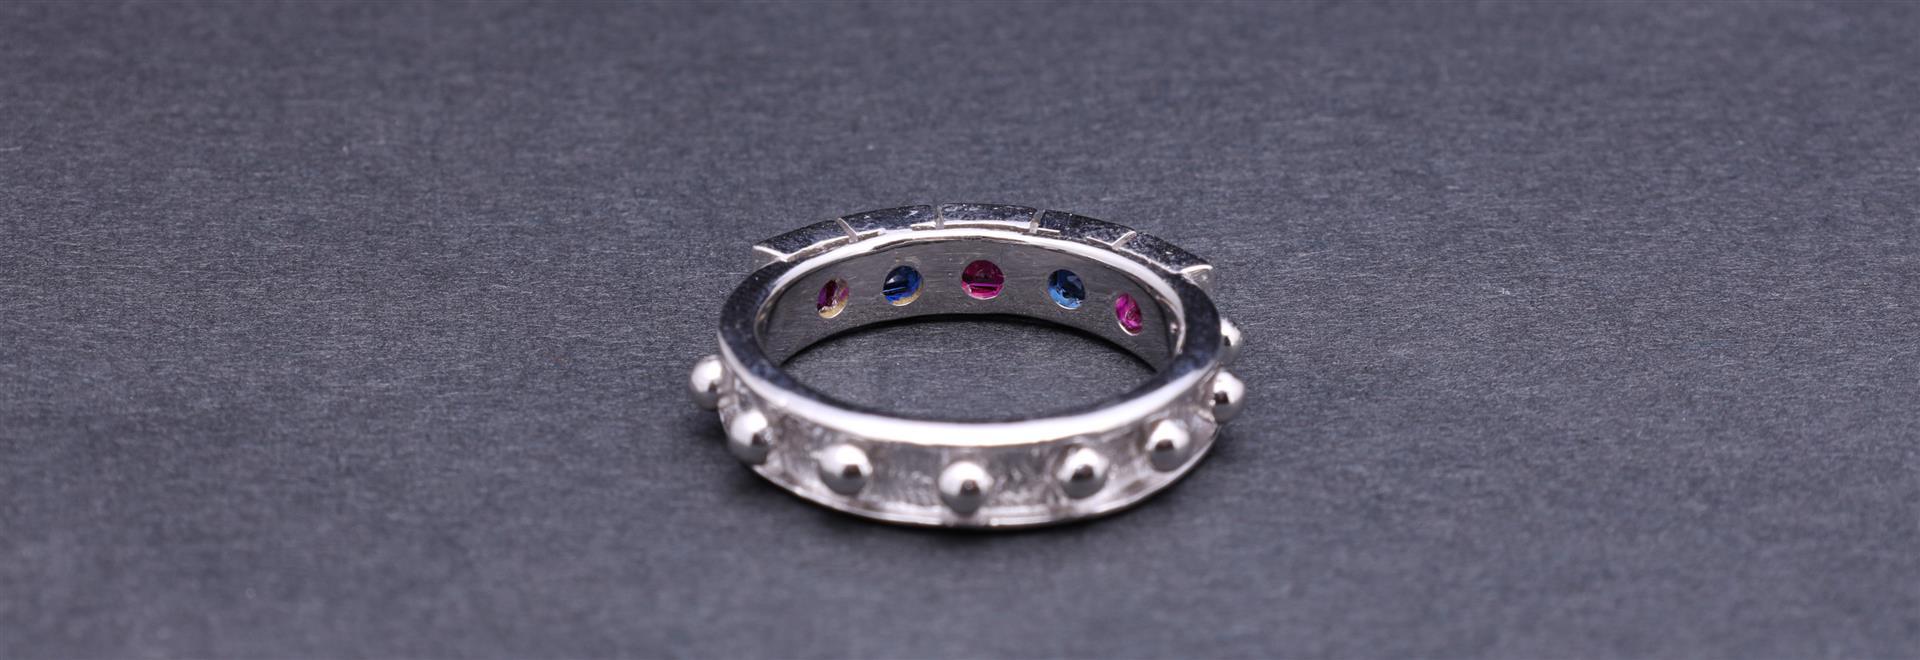 18k White Gold Half Loop Eternity Ring by Carlo Rici